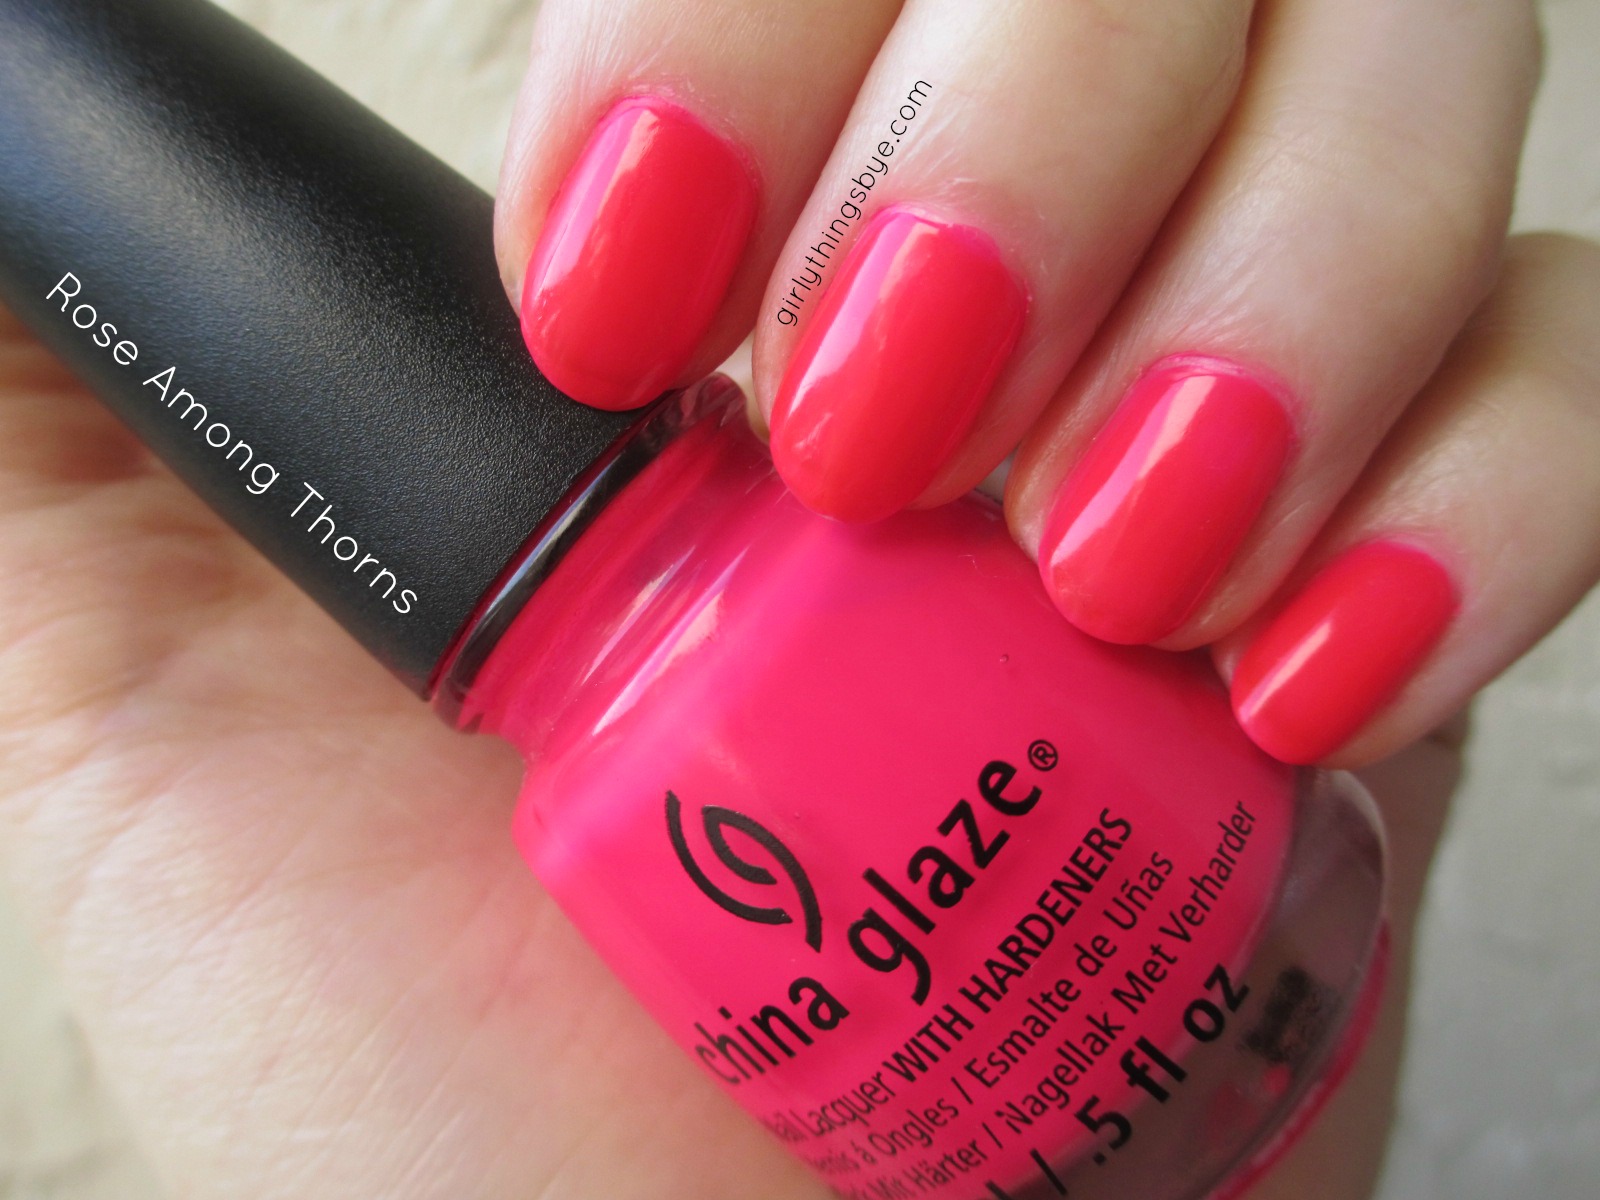 4. China Glaze Nail Lacquer in "Rose Among Thorns" - wide 4